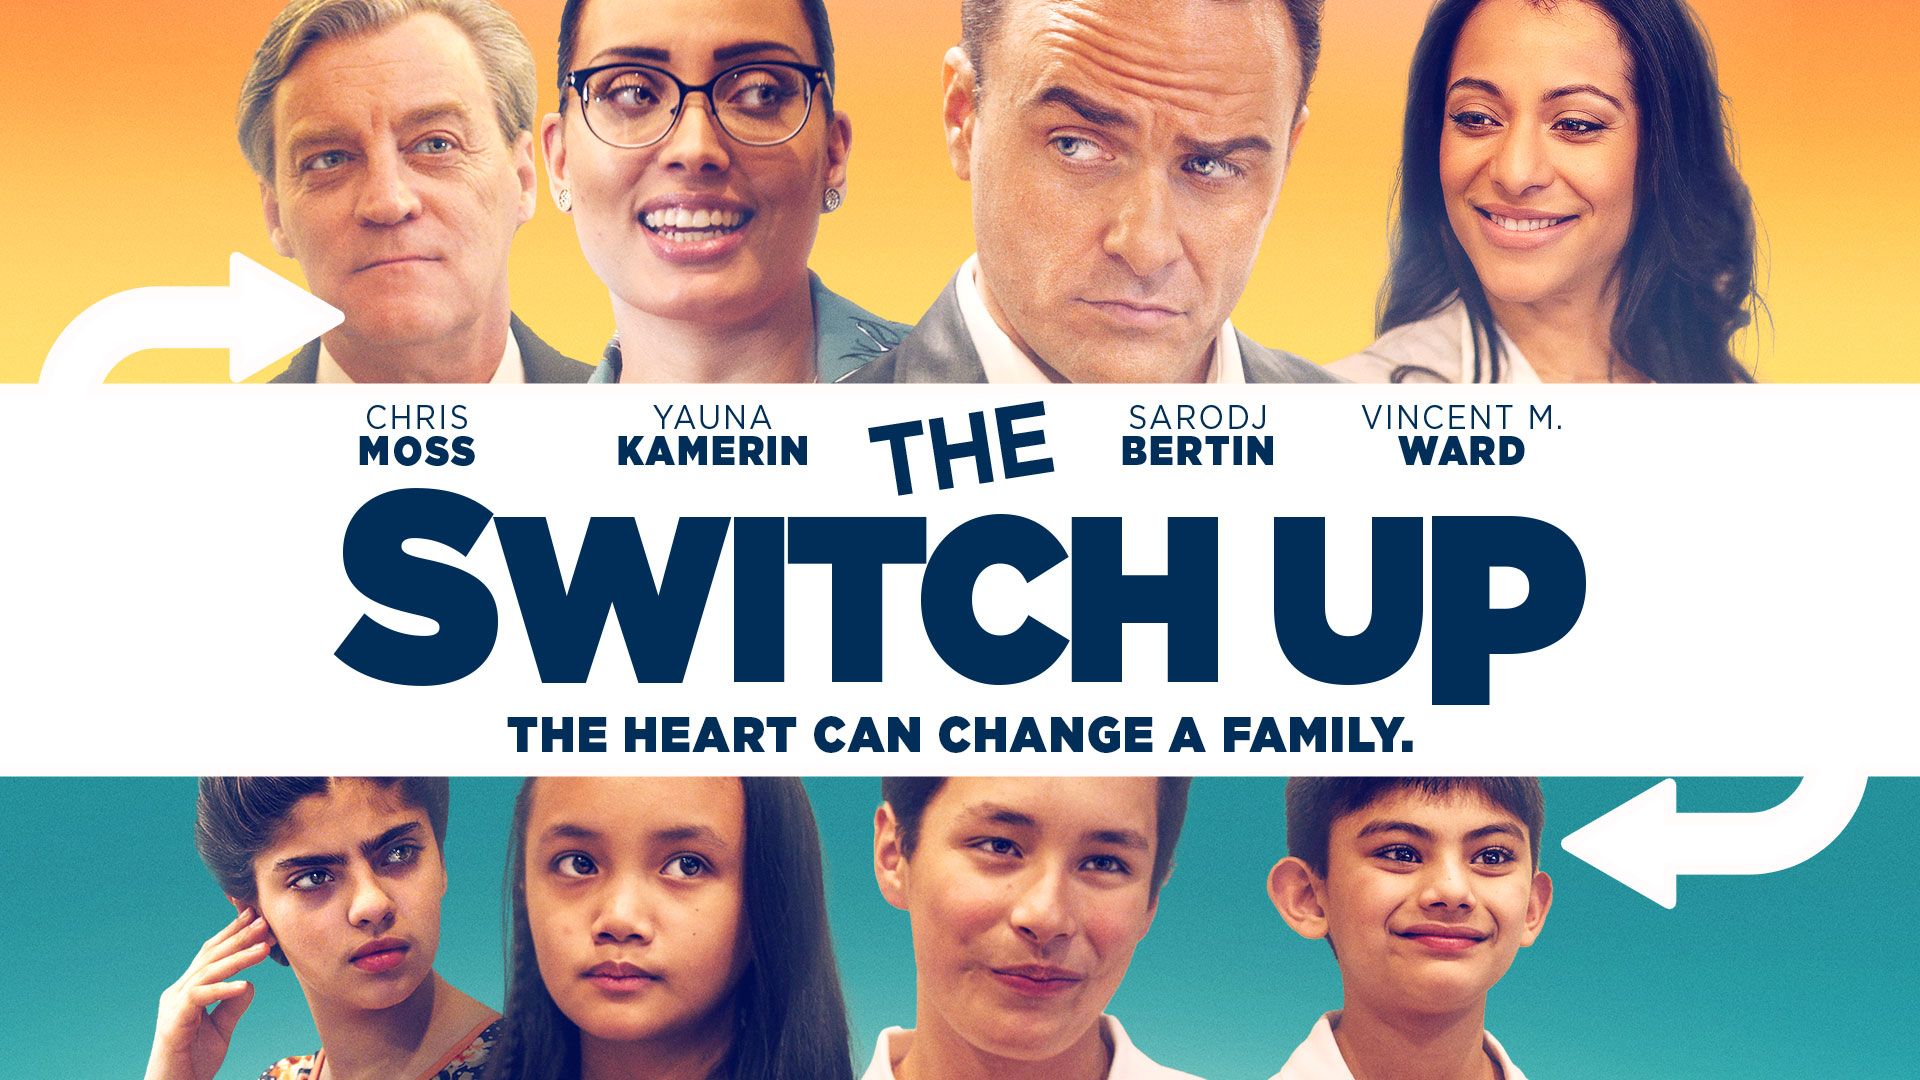 Keyart for the movie The Switch Up